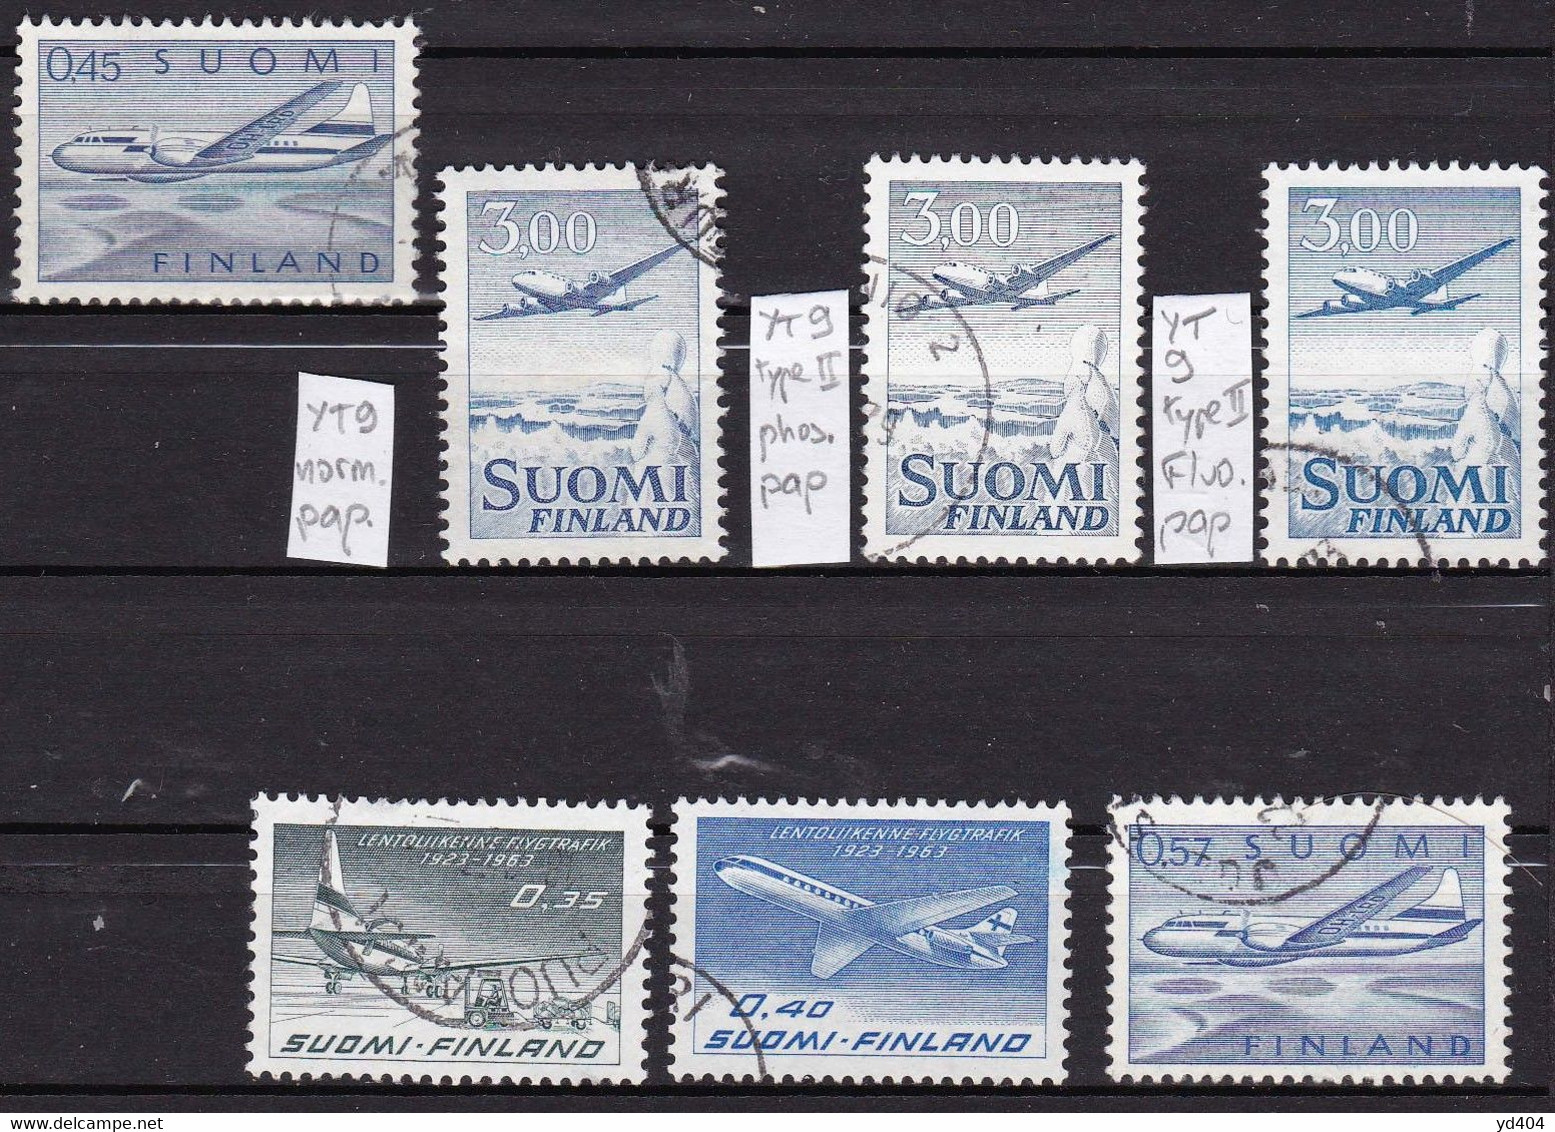 FI350 – FINLANDE – FINLAND – AIRMAIL - 1963-70 – Y&T 8/12 USED - Used Stamps